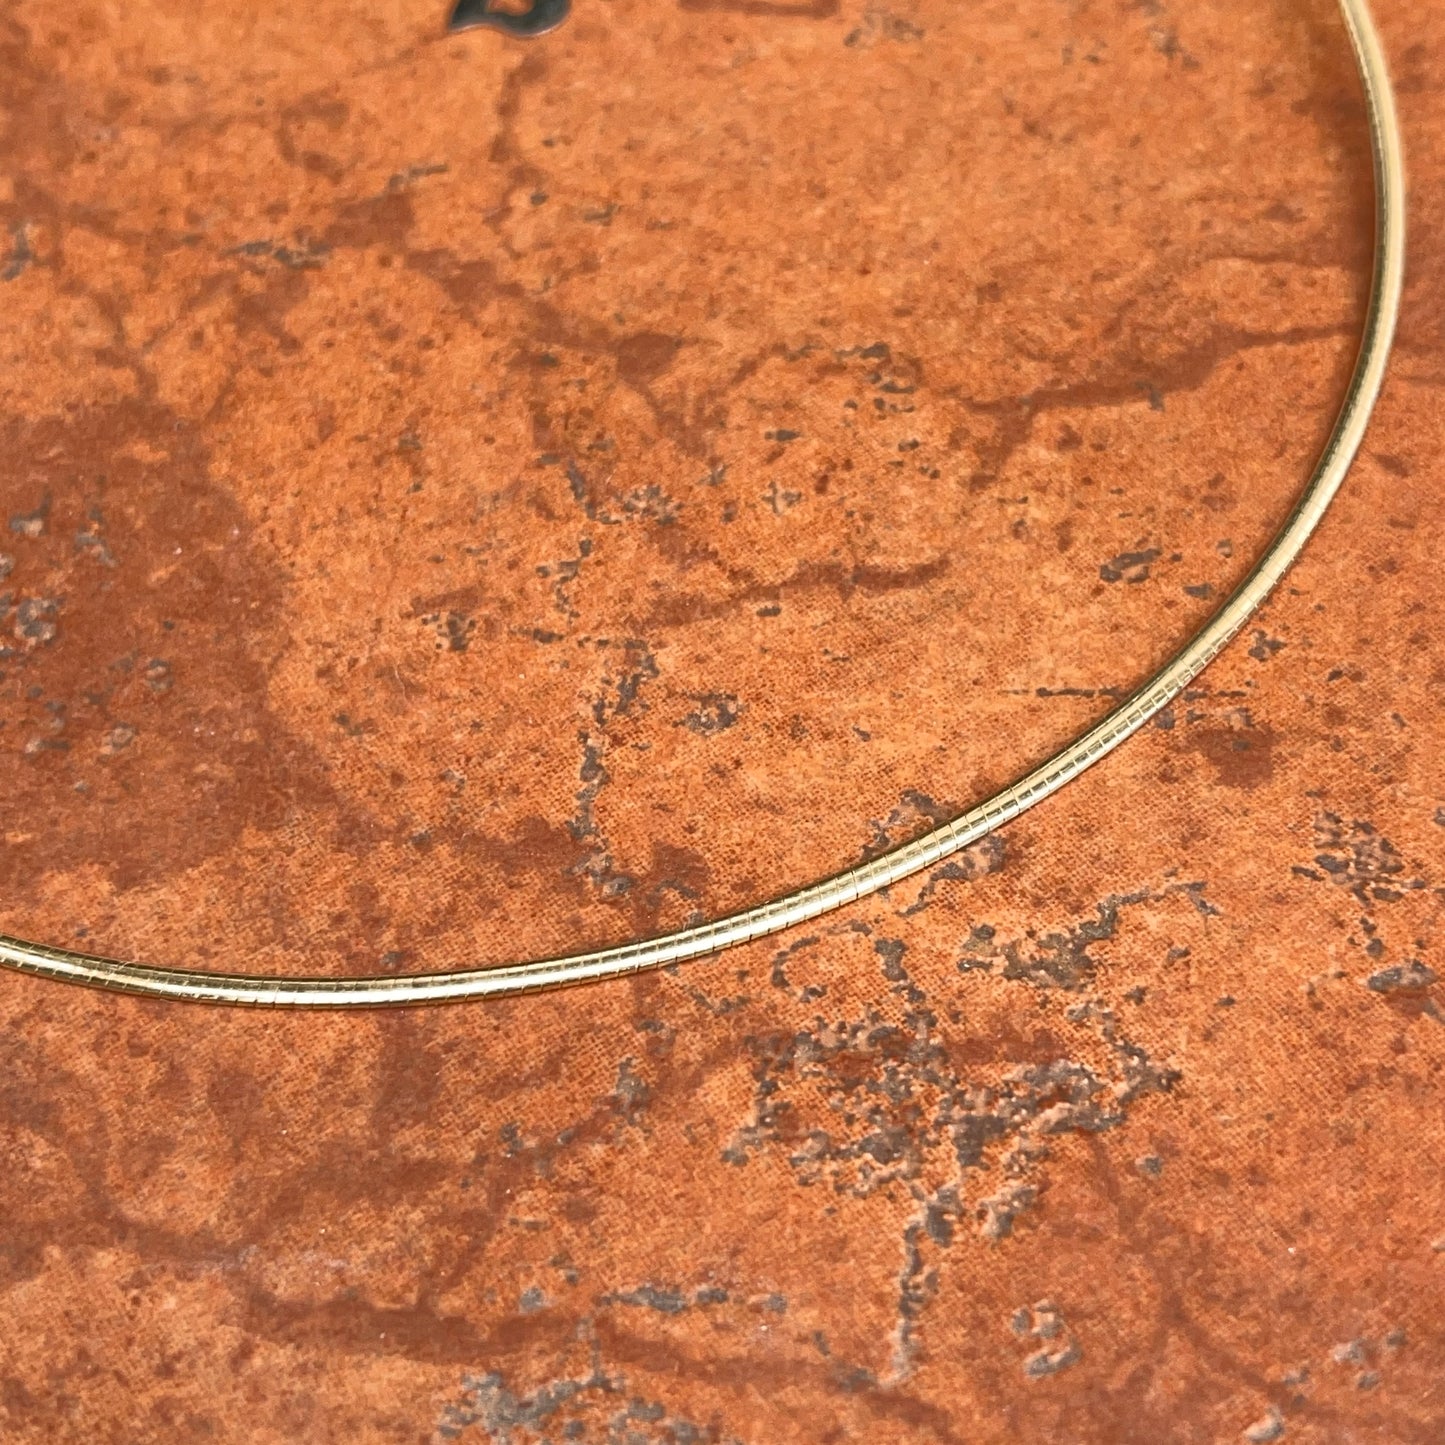 14KT Yellow Gold + White Gold Reversible 2mm Domed Omega Chain Necklace